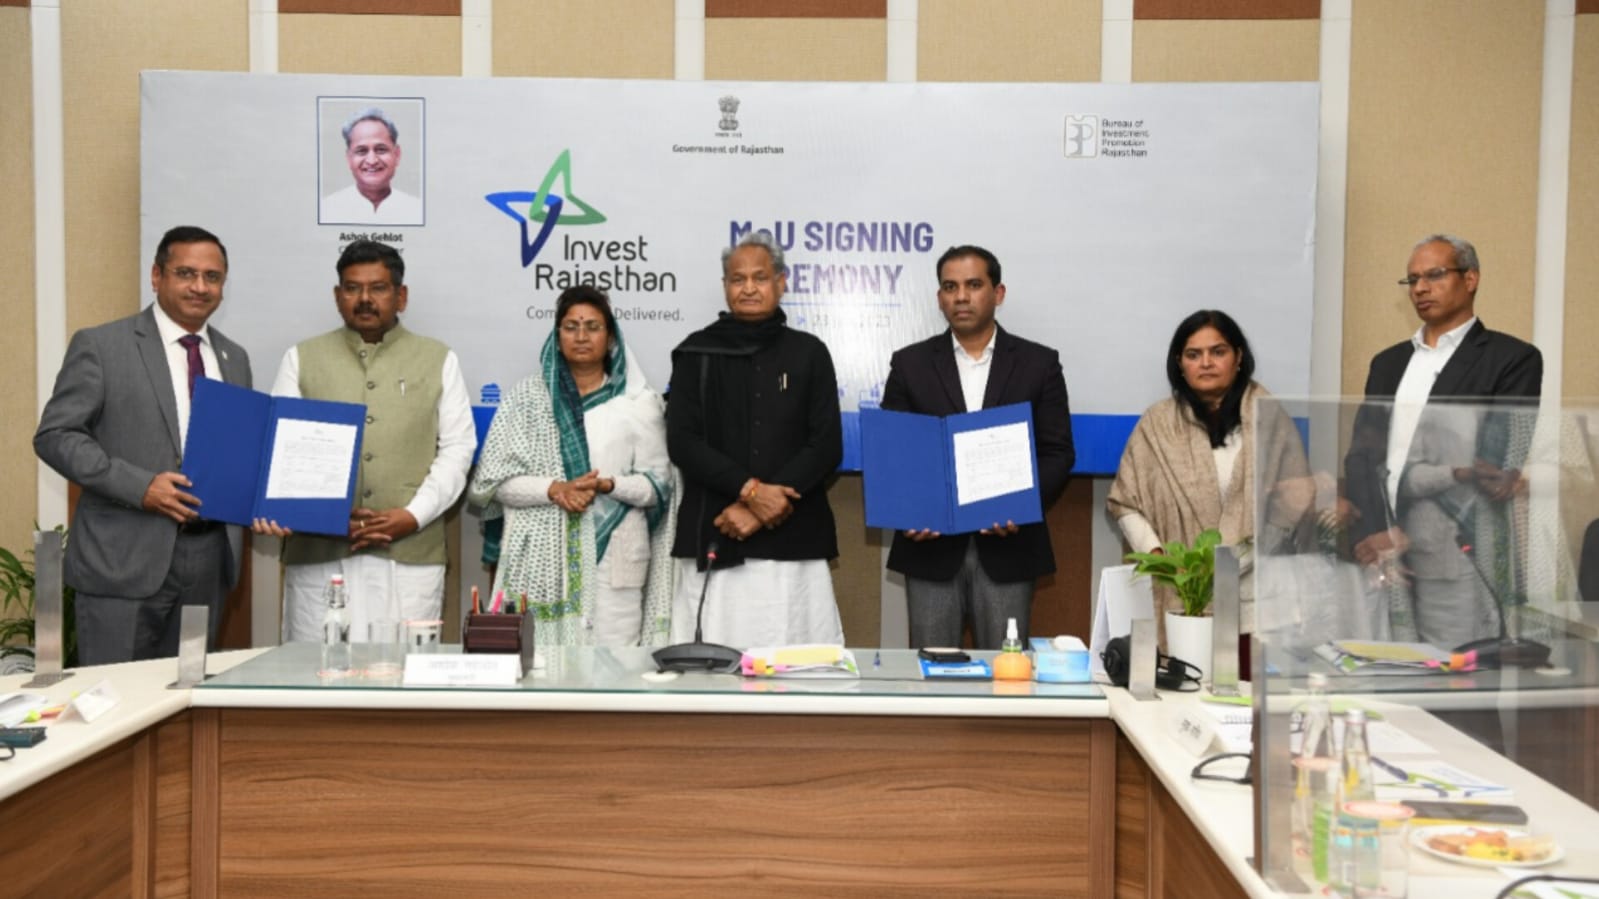 Signed the MoU with Govt. of Rajasthan to set up a 1 GW Renewable Energy Power plant